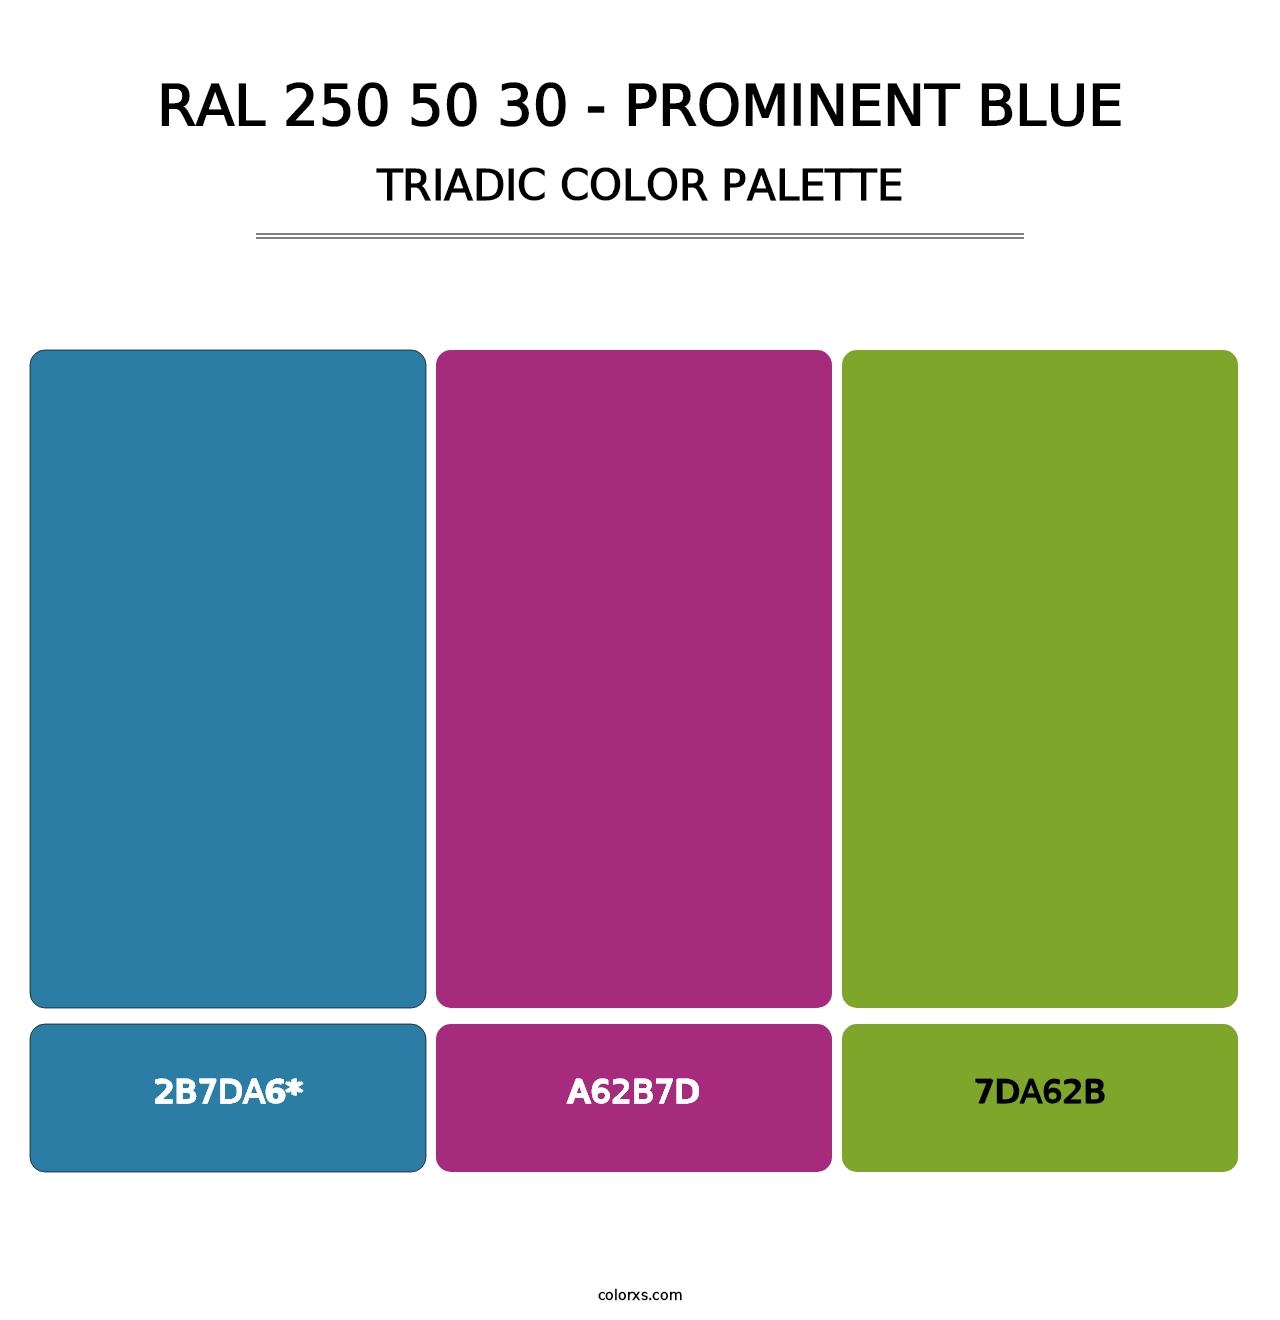 RAL 250 50 30 - Prominent Blue - Triadic Color Palette